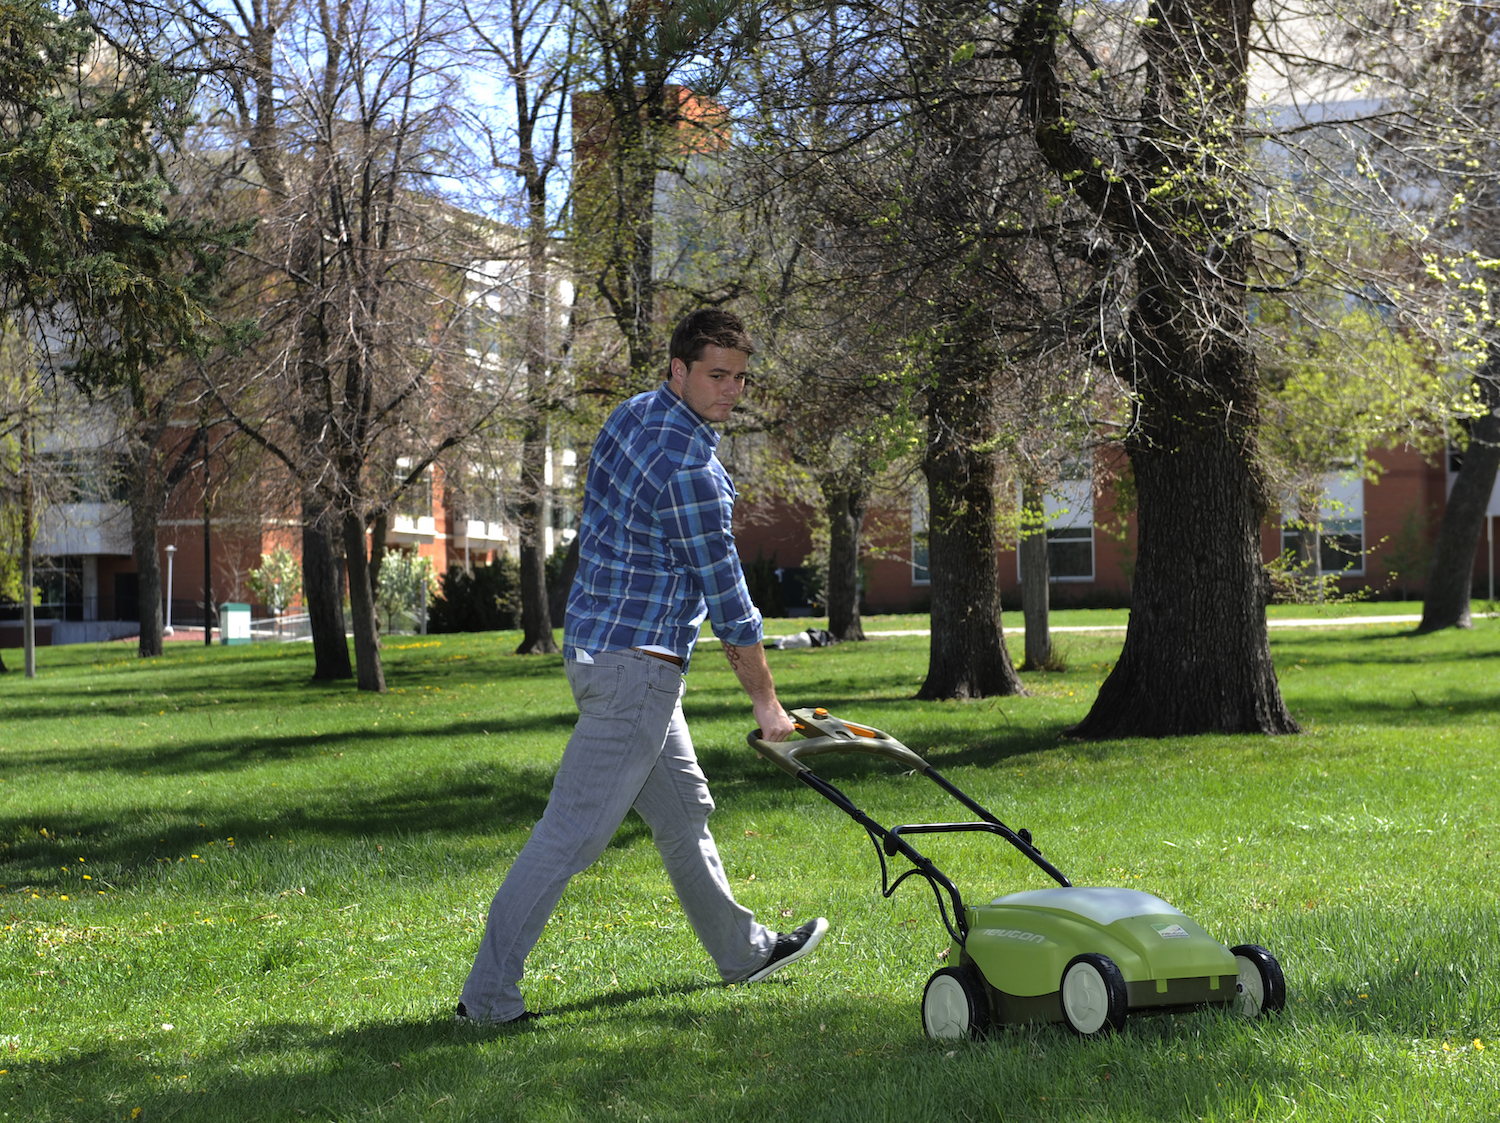 A man mowing the lawn with an electric lawn mower